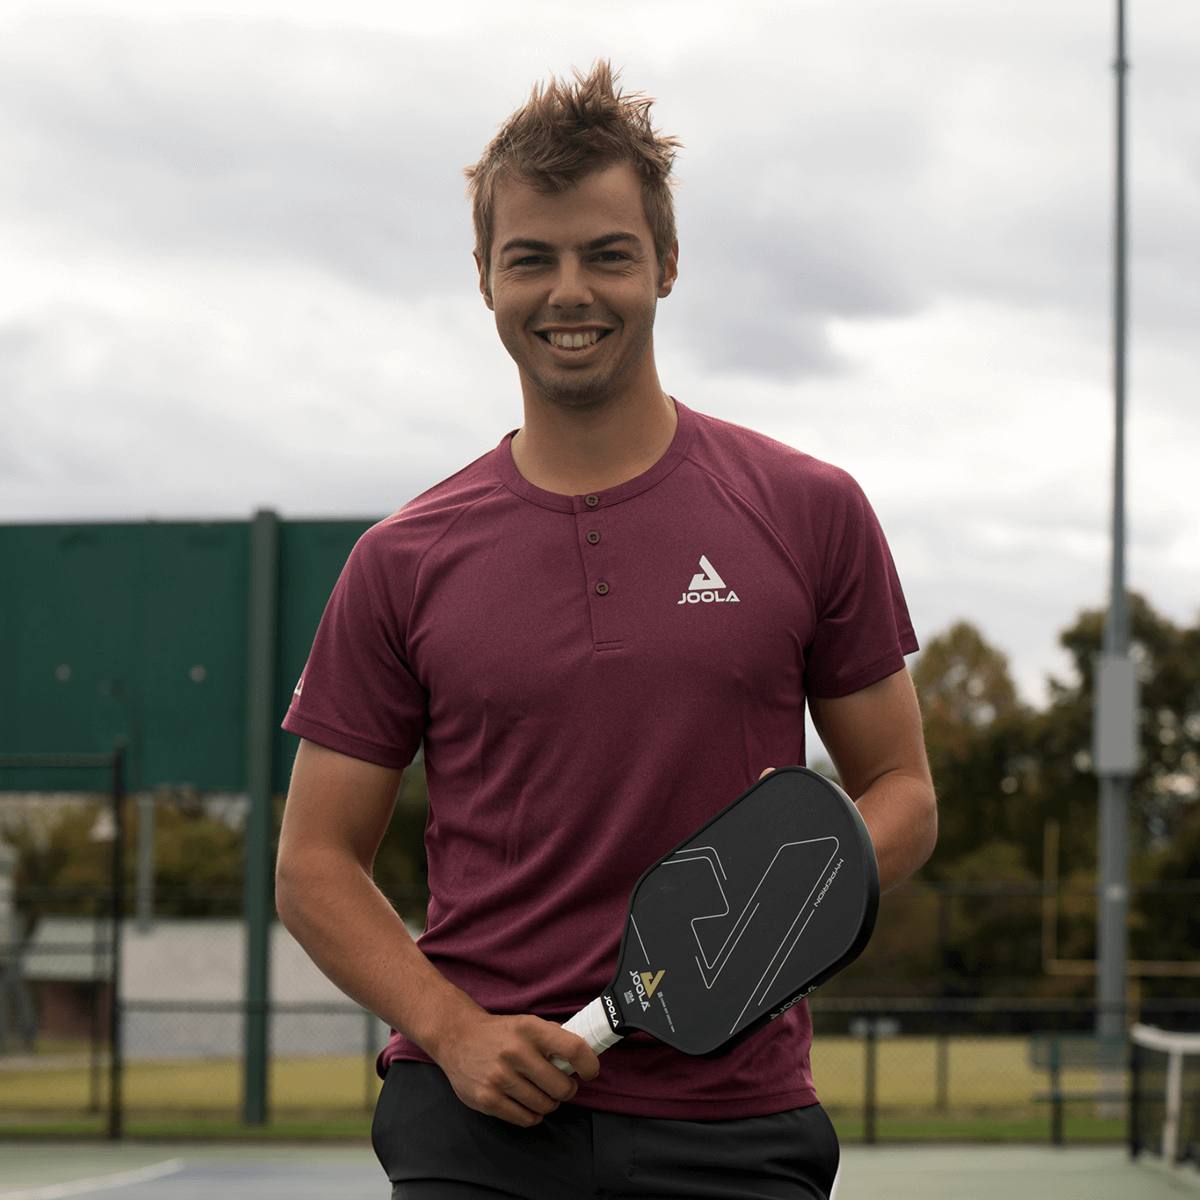 Image: Ben Johns smiling while holding a JOOLA Hyperion pickleball paddle on the court and wearing the JOOLA Ben Johns Short Sleeve Henley in Burgundy